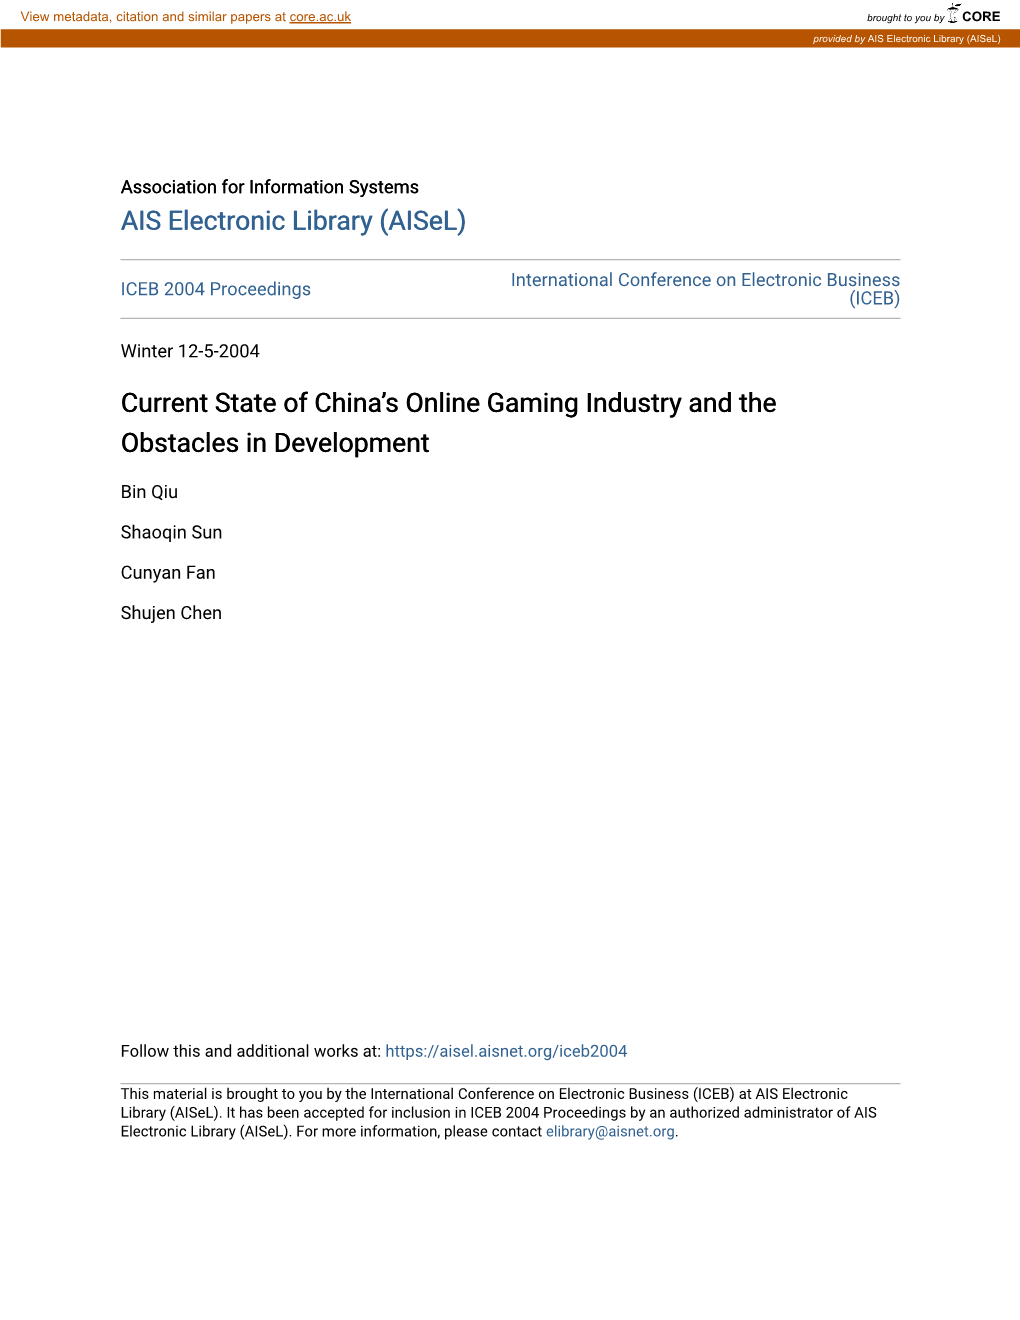 Current State of China's Online Gaming Industry and the Obstacles